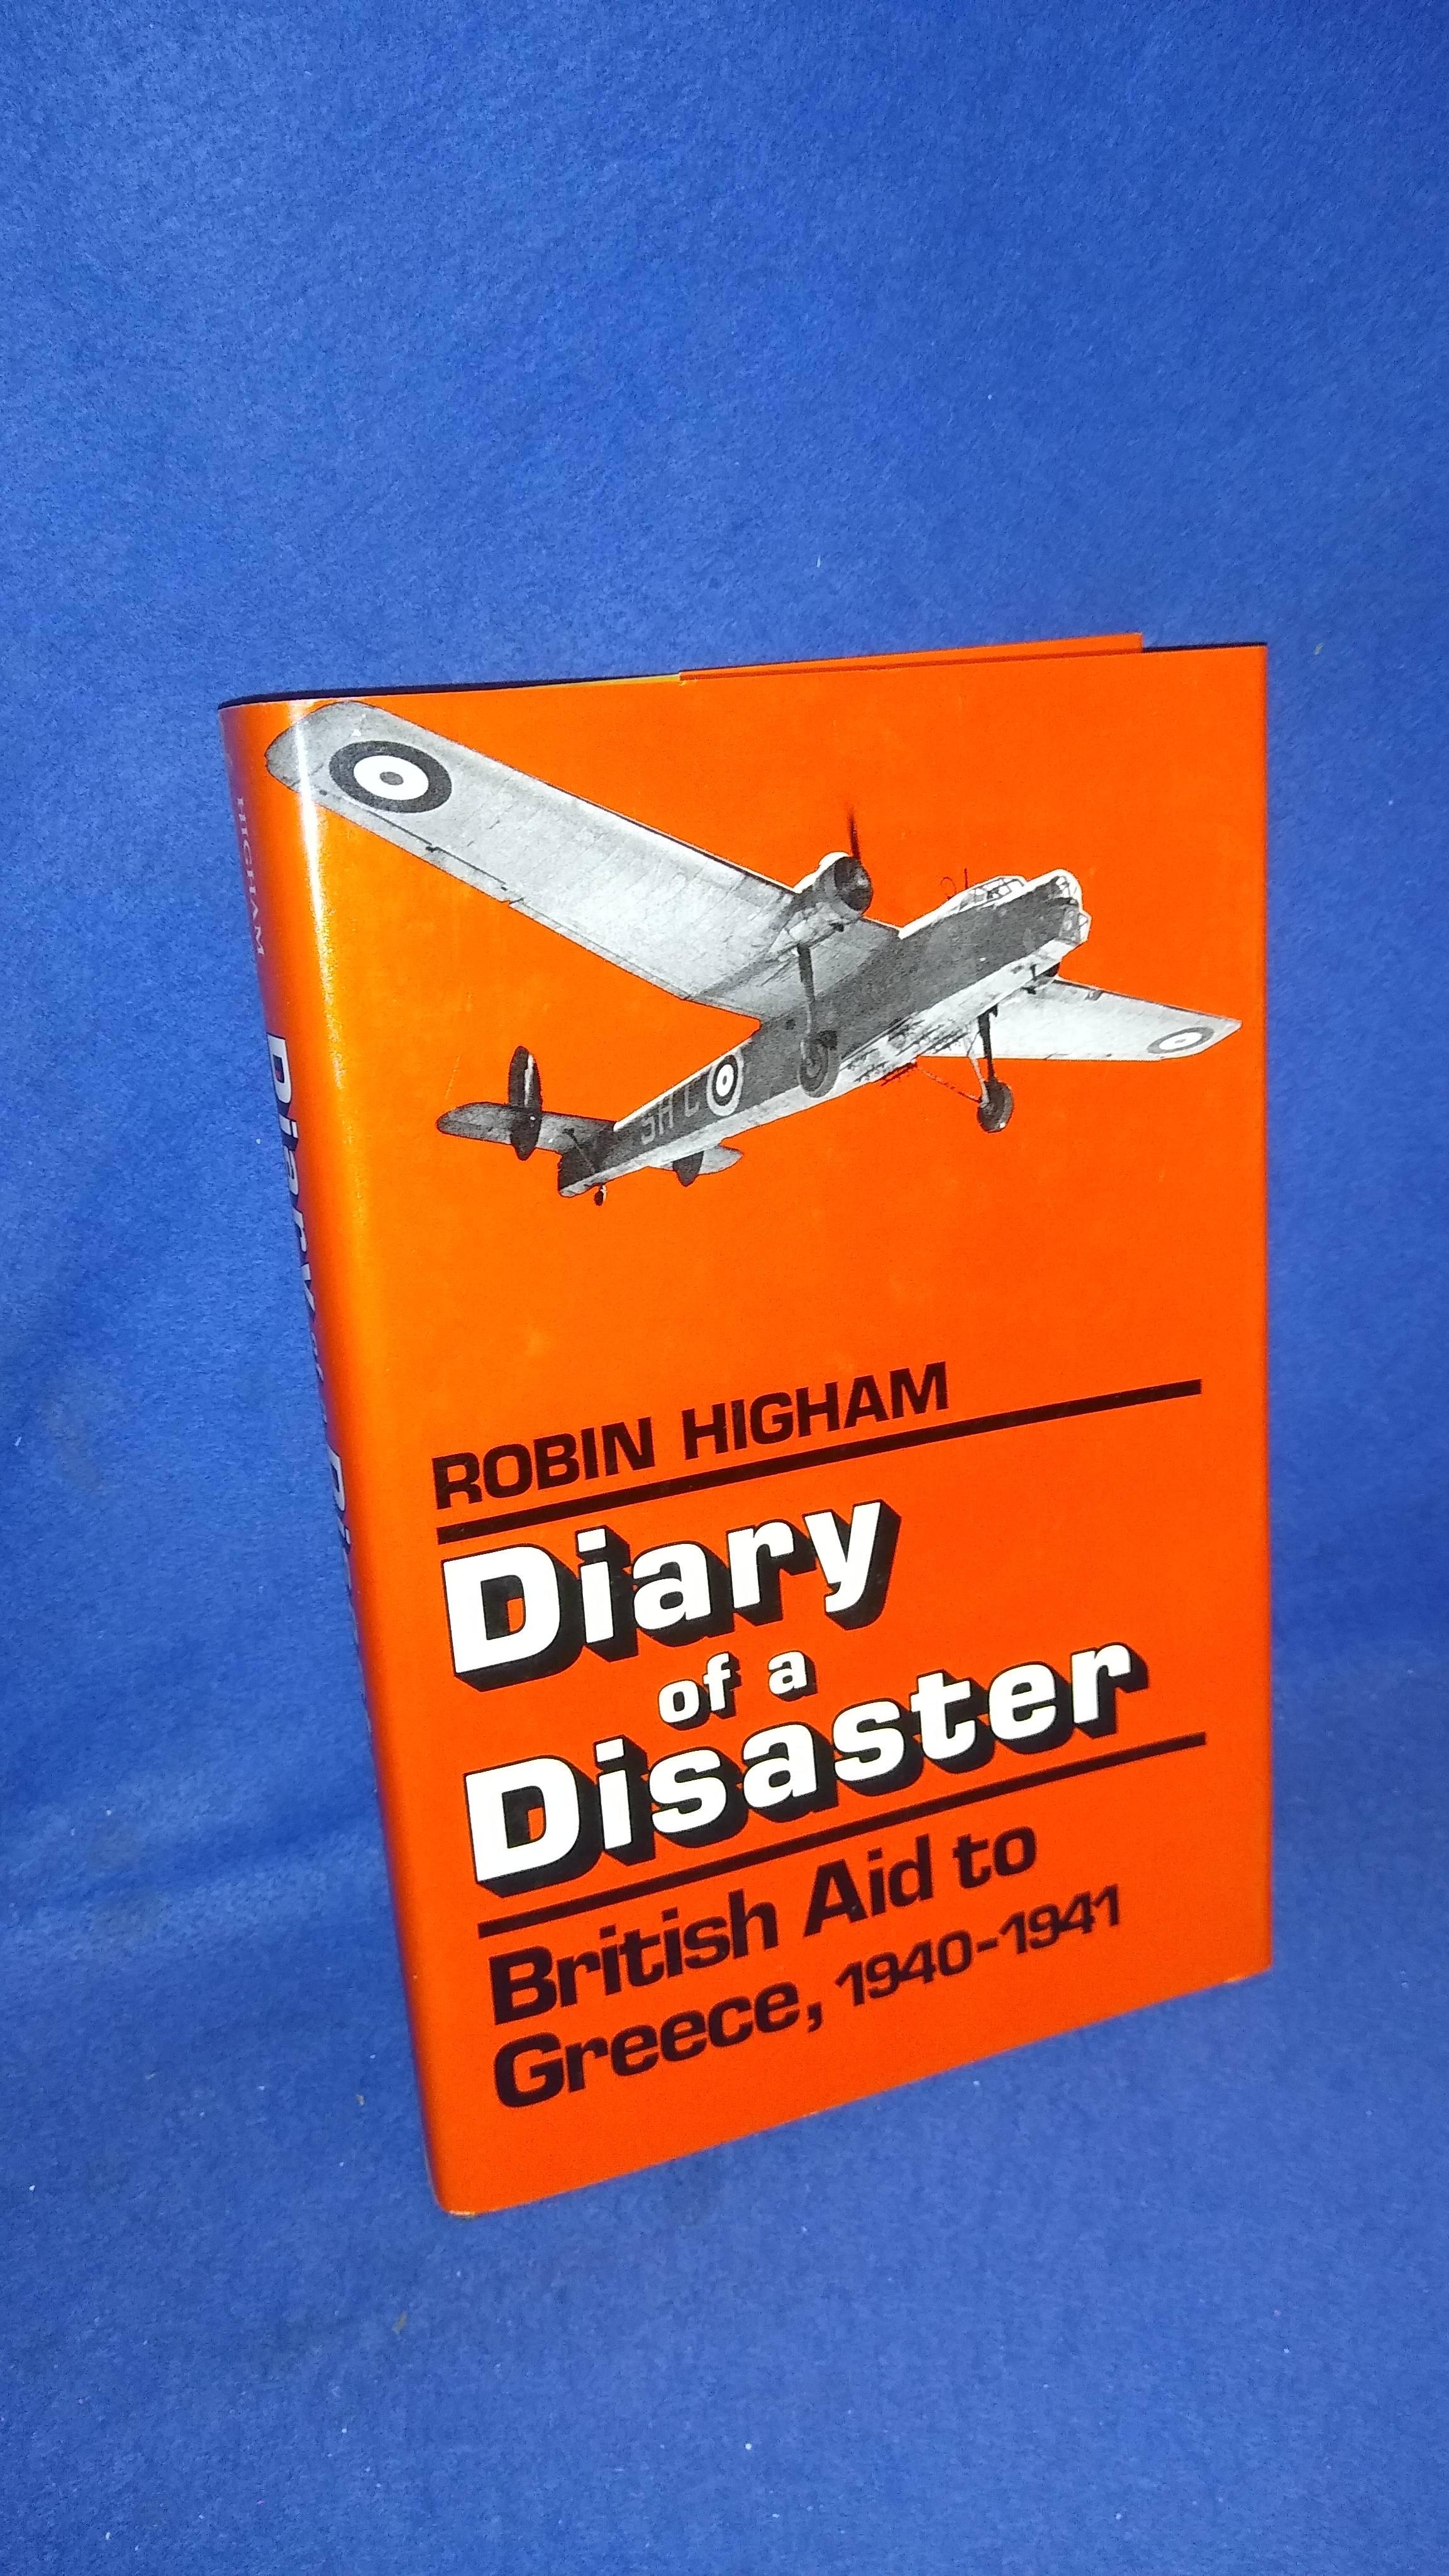 Diary of a Disaster: British Aid to Greece, 1940-1941.